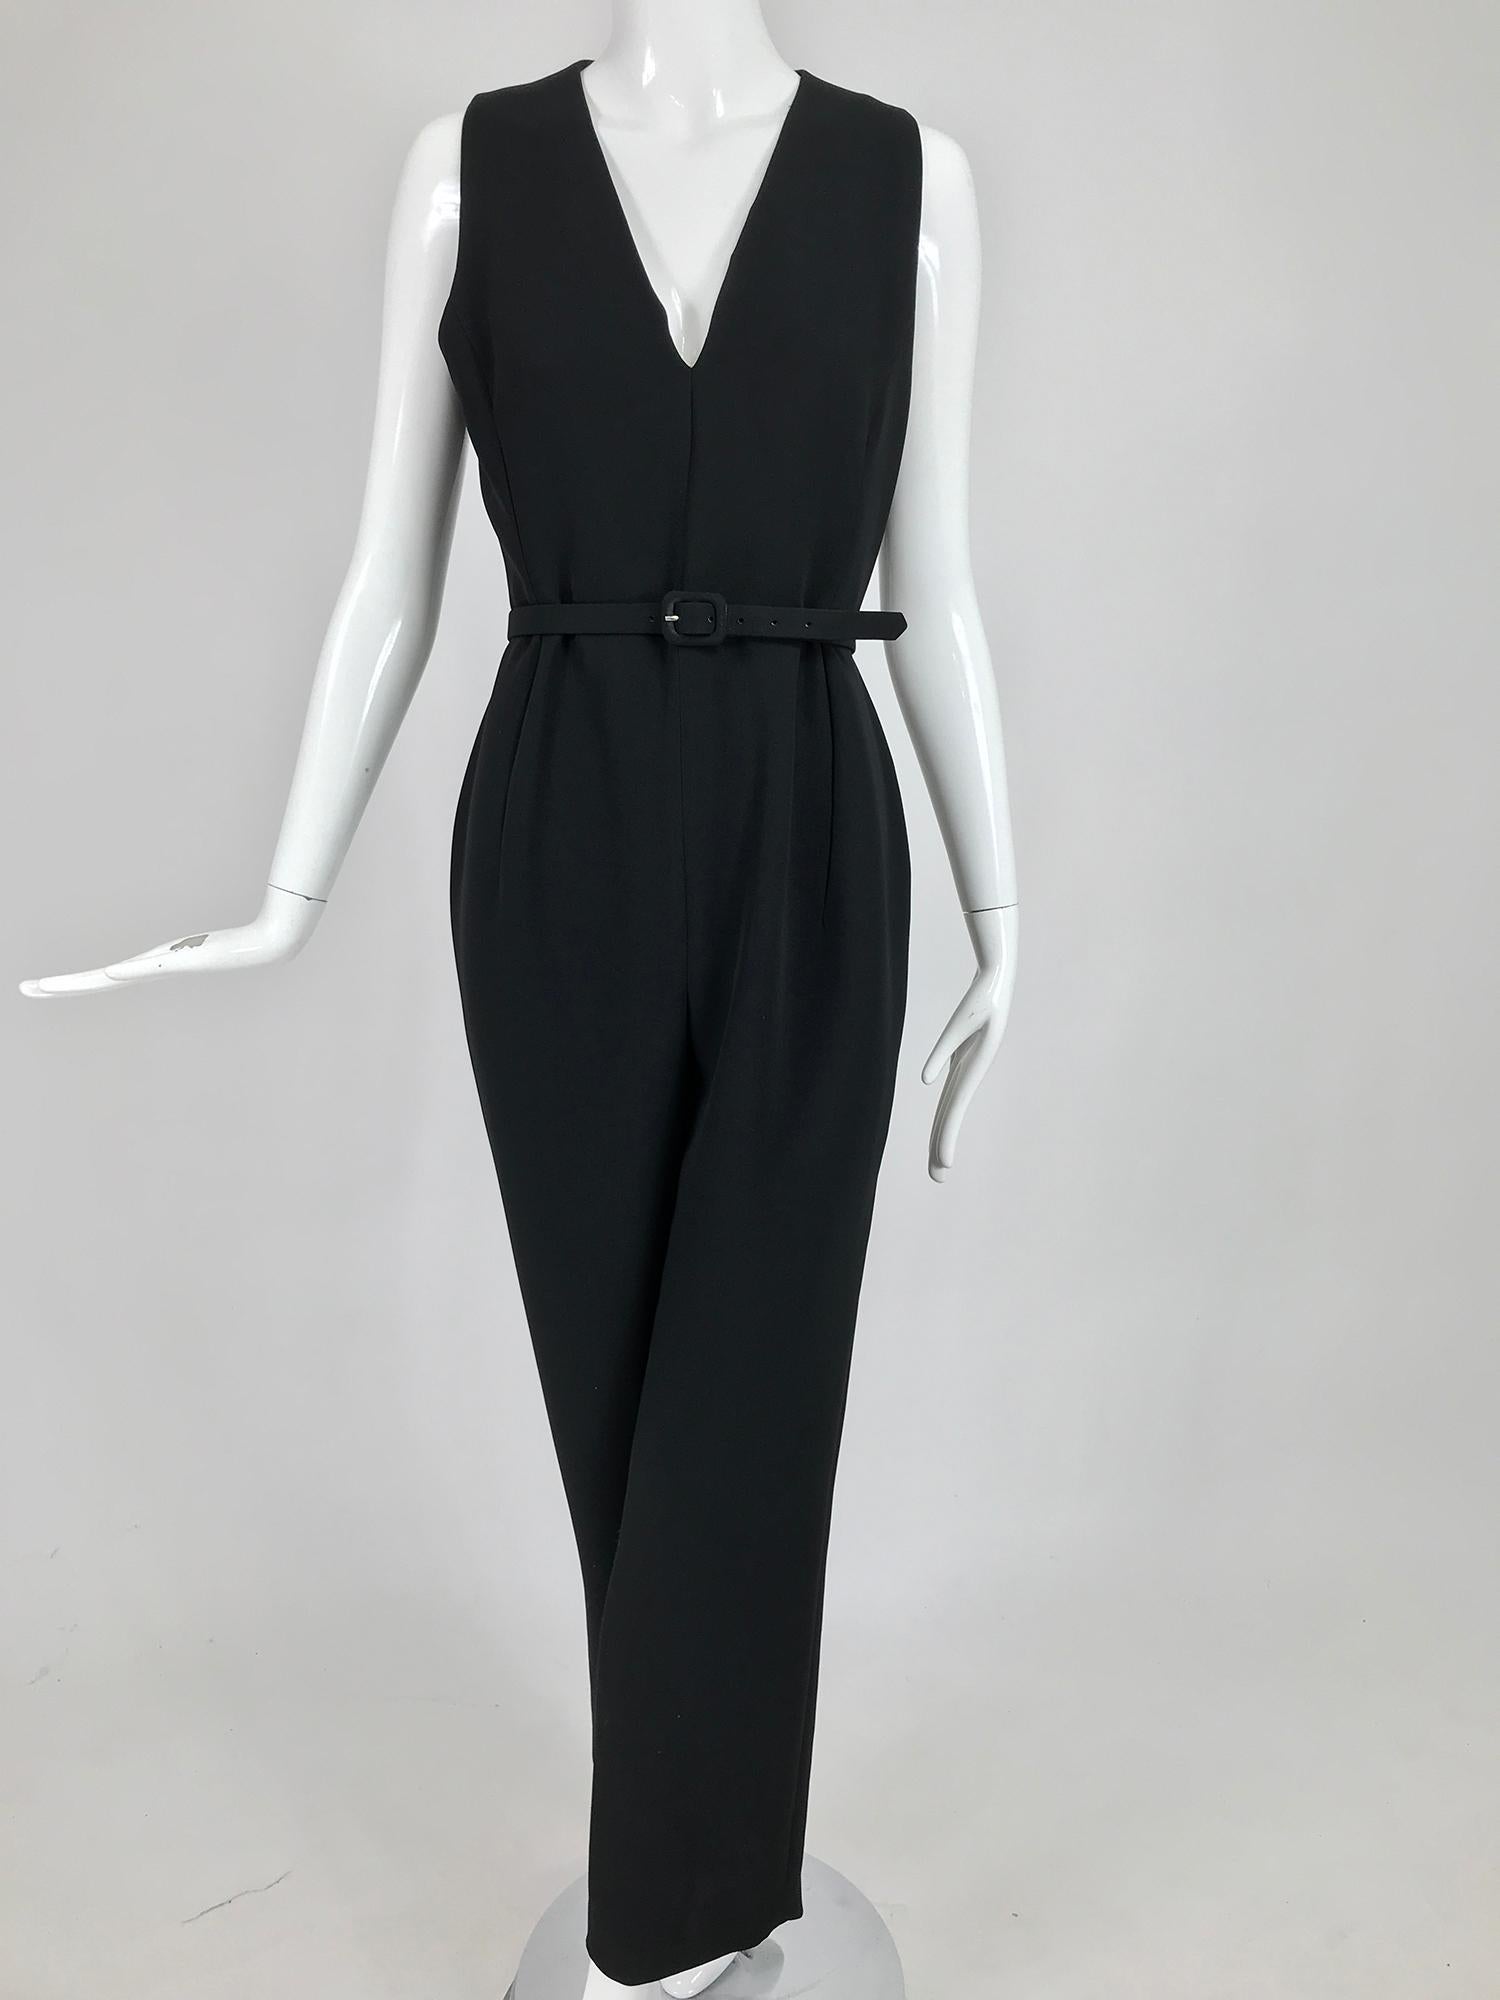 Badgley Mischka black tuxedo coat and matching jumpsuit each marked size 6.  This beautiful 2pc set can be worn as a chic outfit that is perfect for any occasion that requires you to look amazing, or worn as separates. 
The coat closes at the front